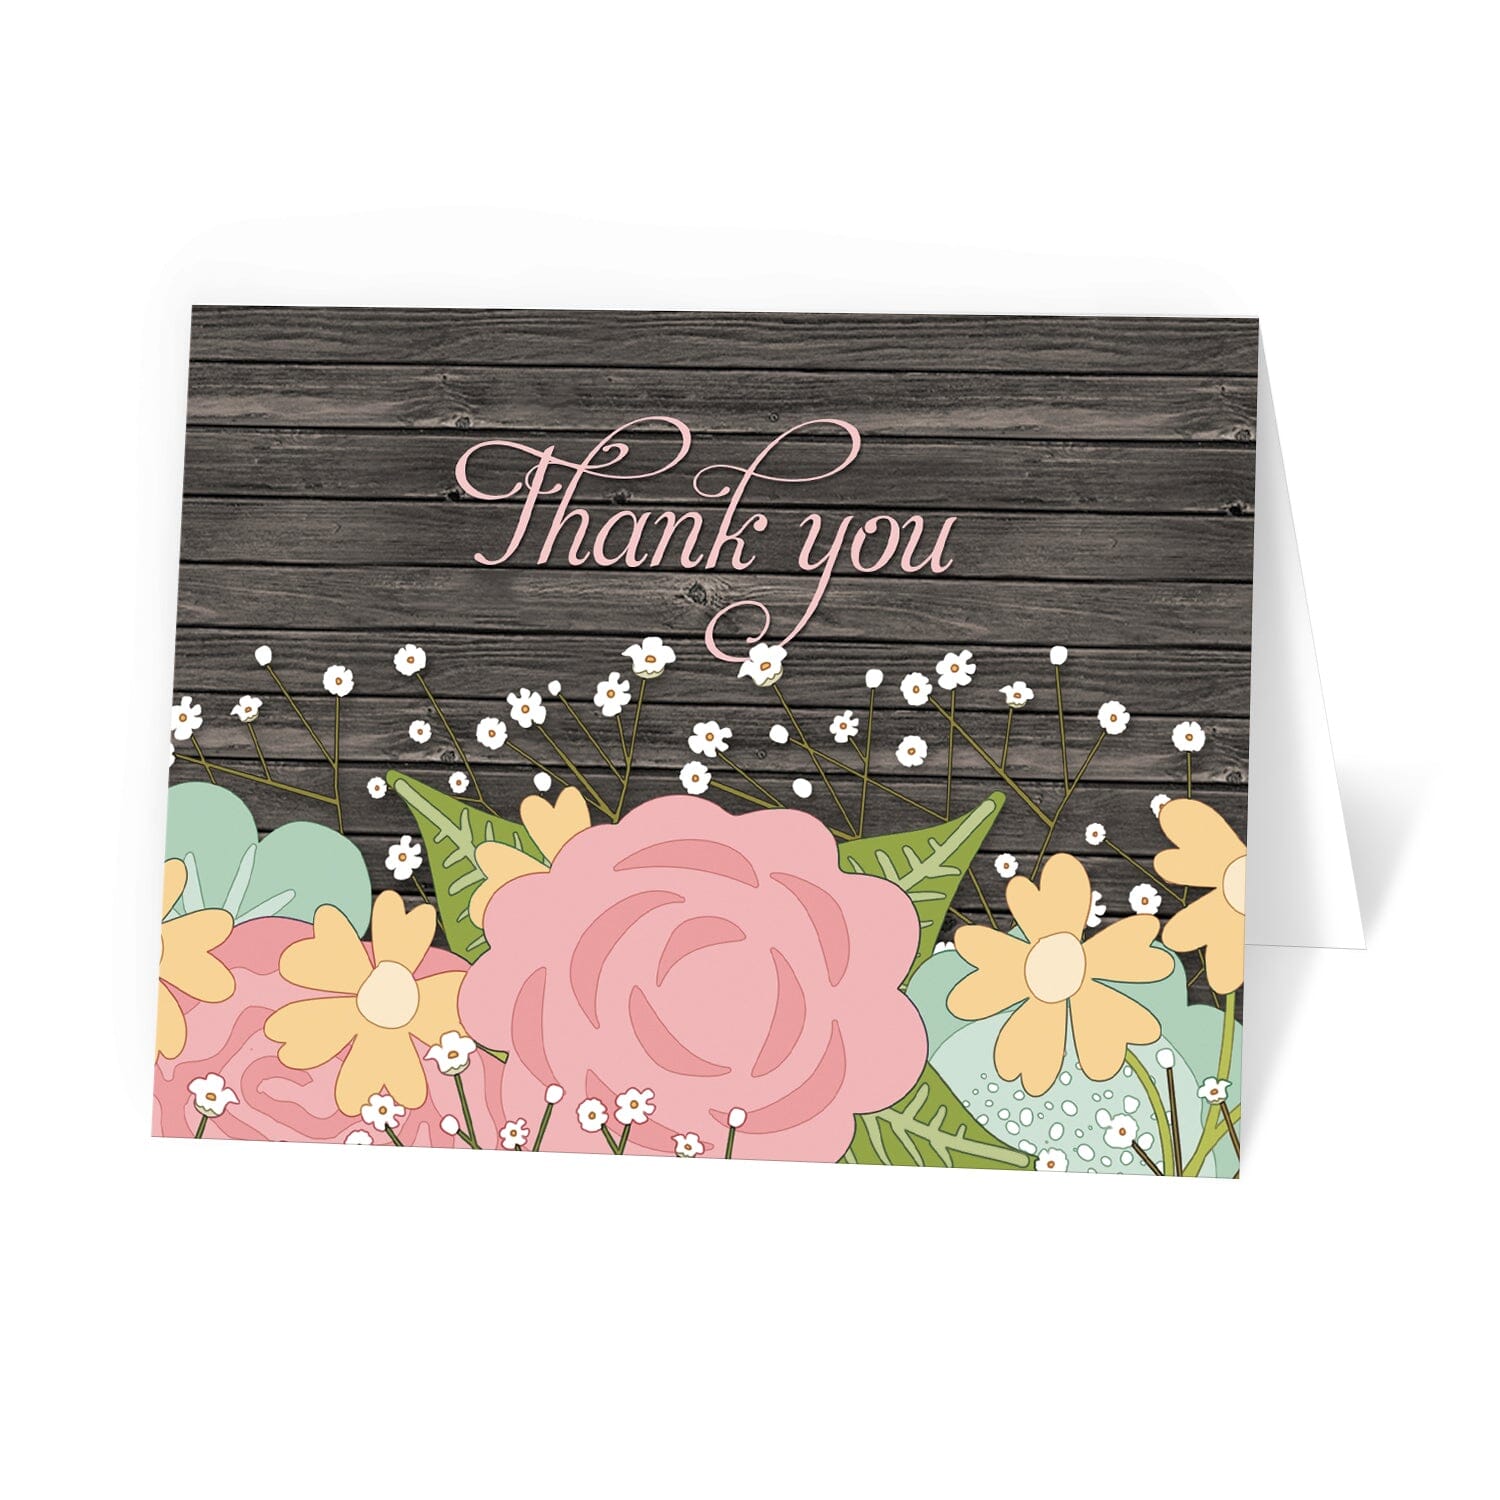 Rustic Floral Wood Baby's Breath Thank You Cards at Artistically Invited.